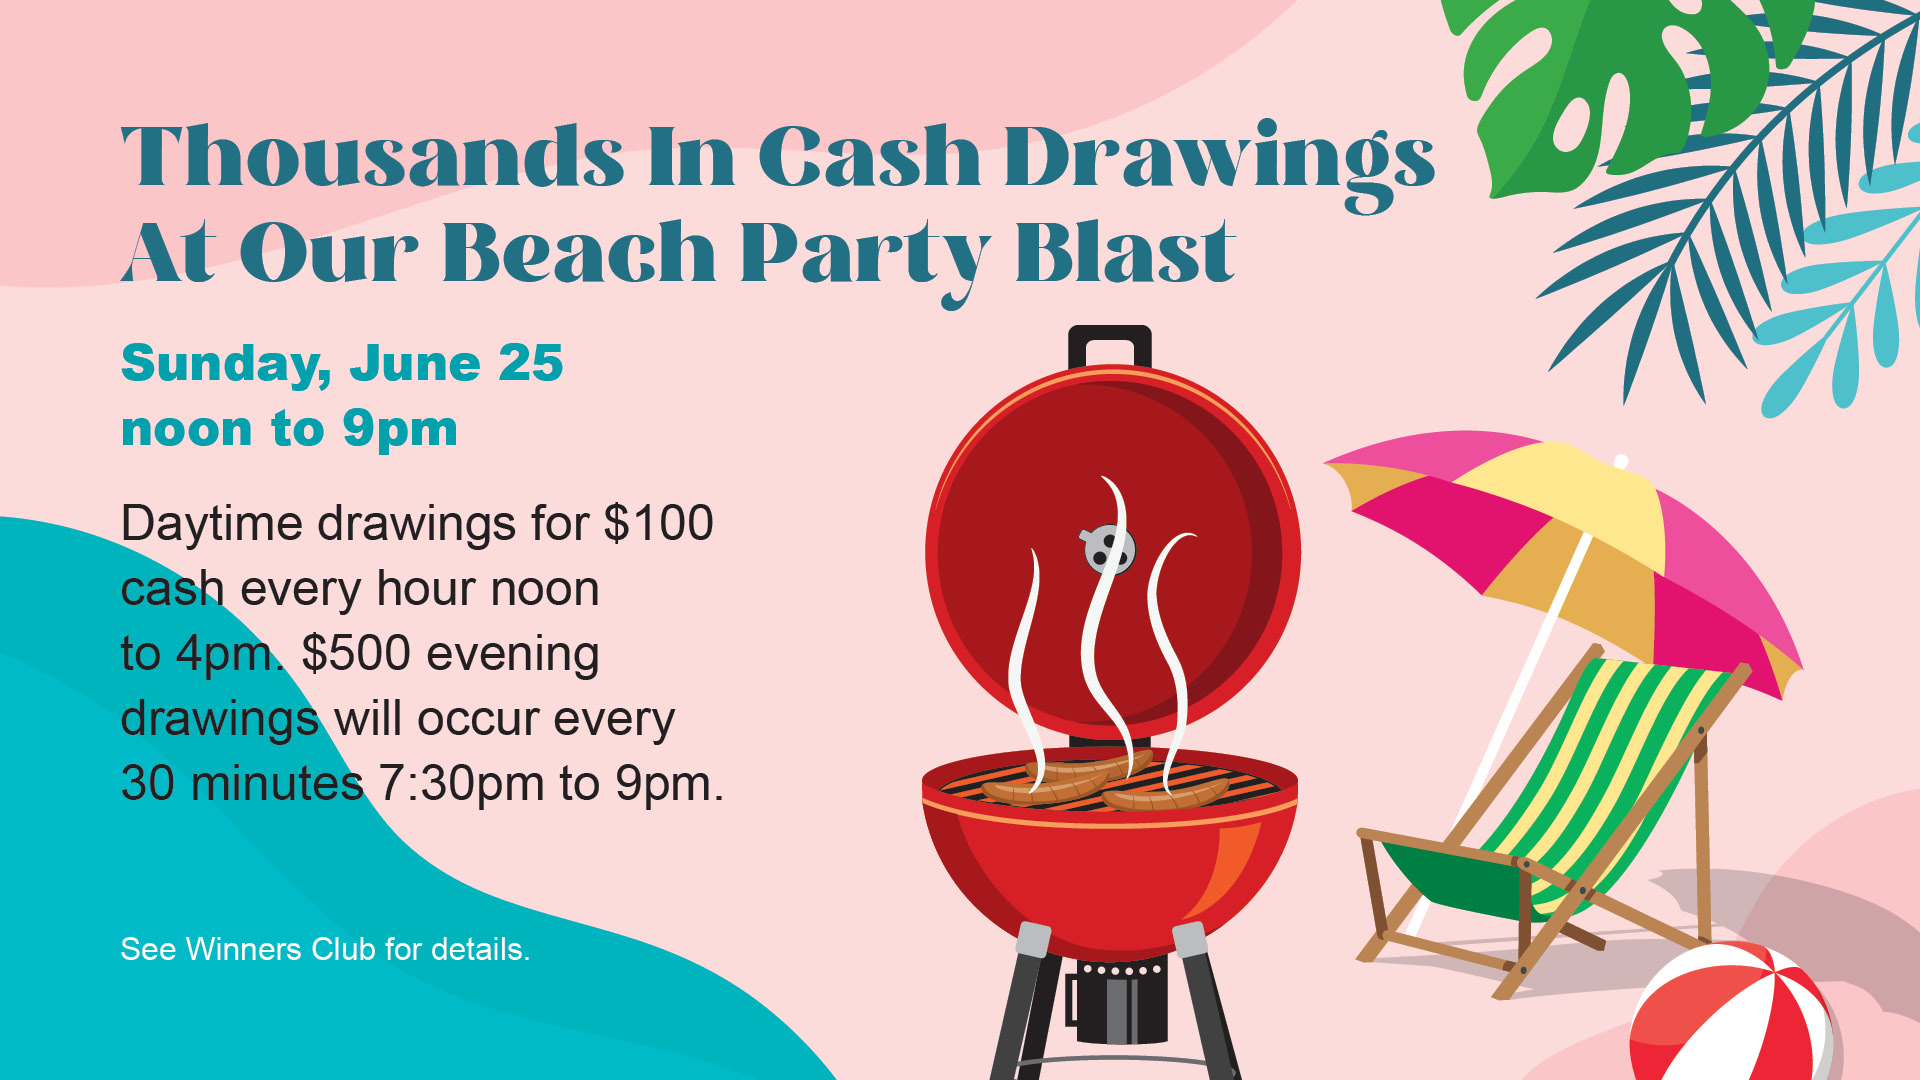 Thousands in cash drawings at our Beach Party Blast - Sunday, June 25. Noon to 9pm. Daytime drawings for $100 cash every hour noon to 4pm. $500 evening drawings will occur every 30 minutes 7:30pm to 9pm. See Winners Club for details.